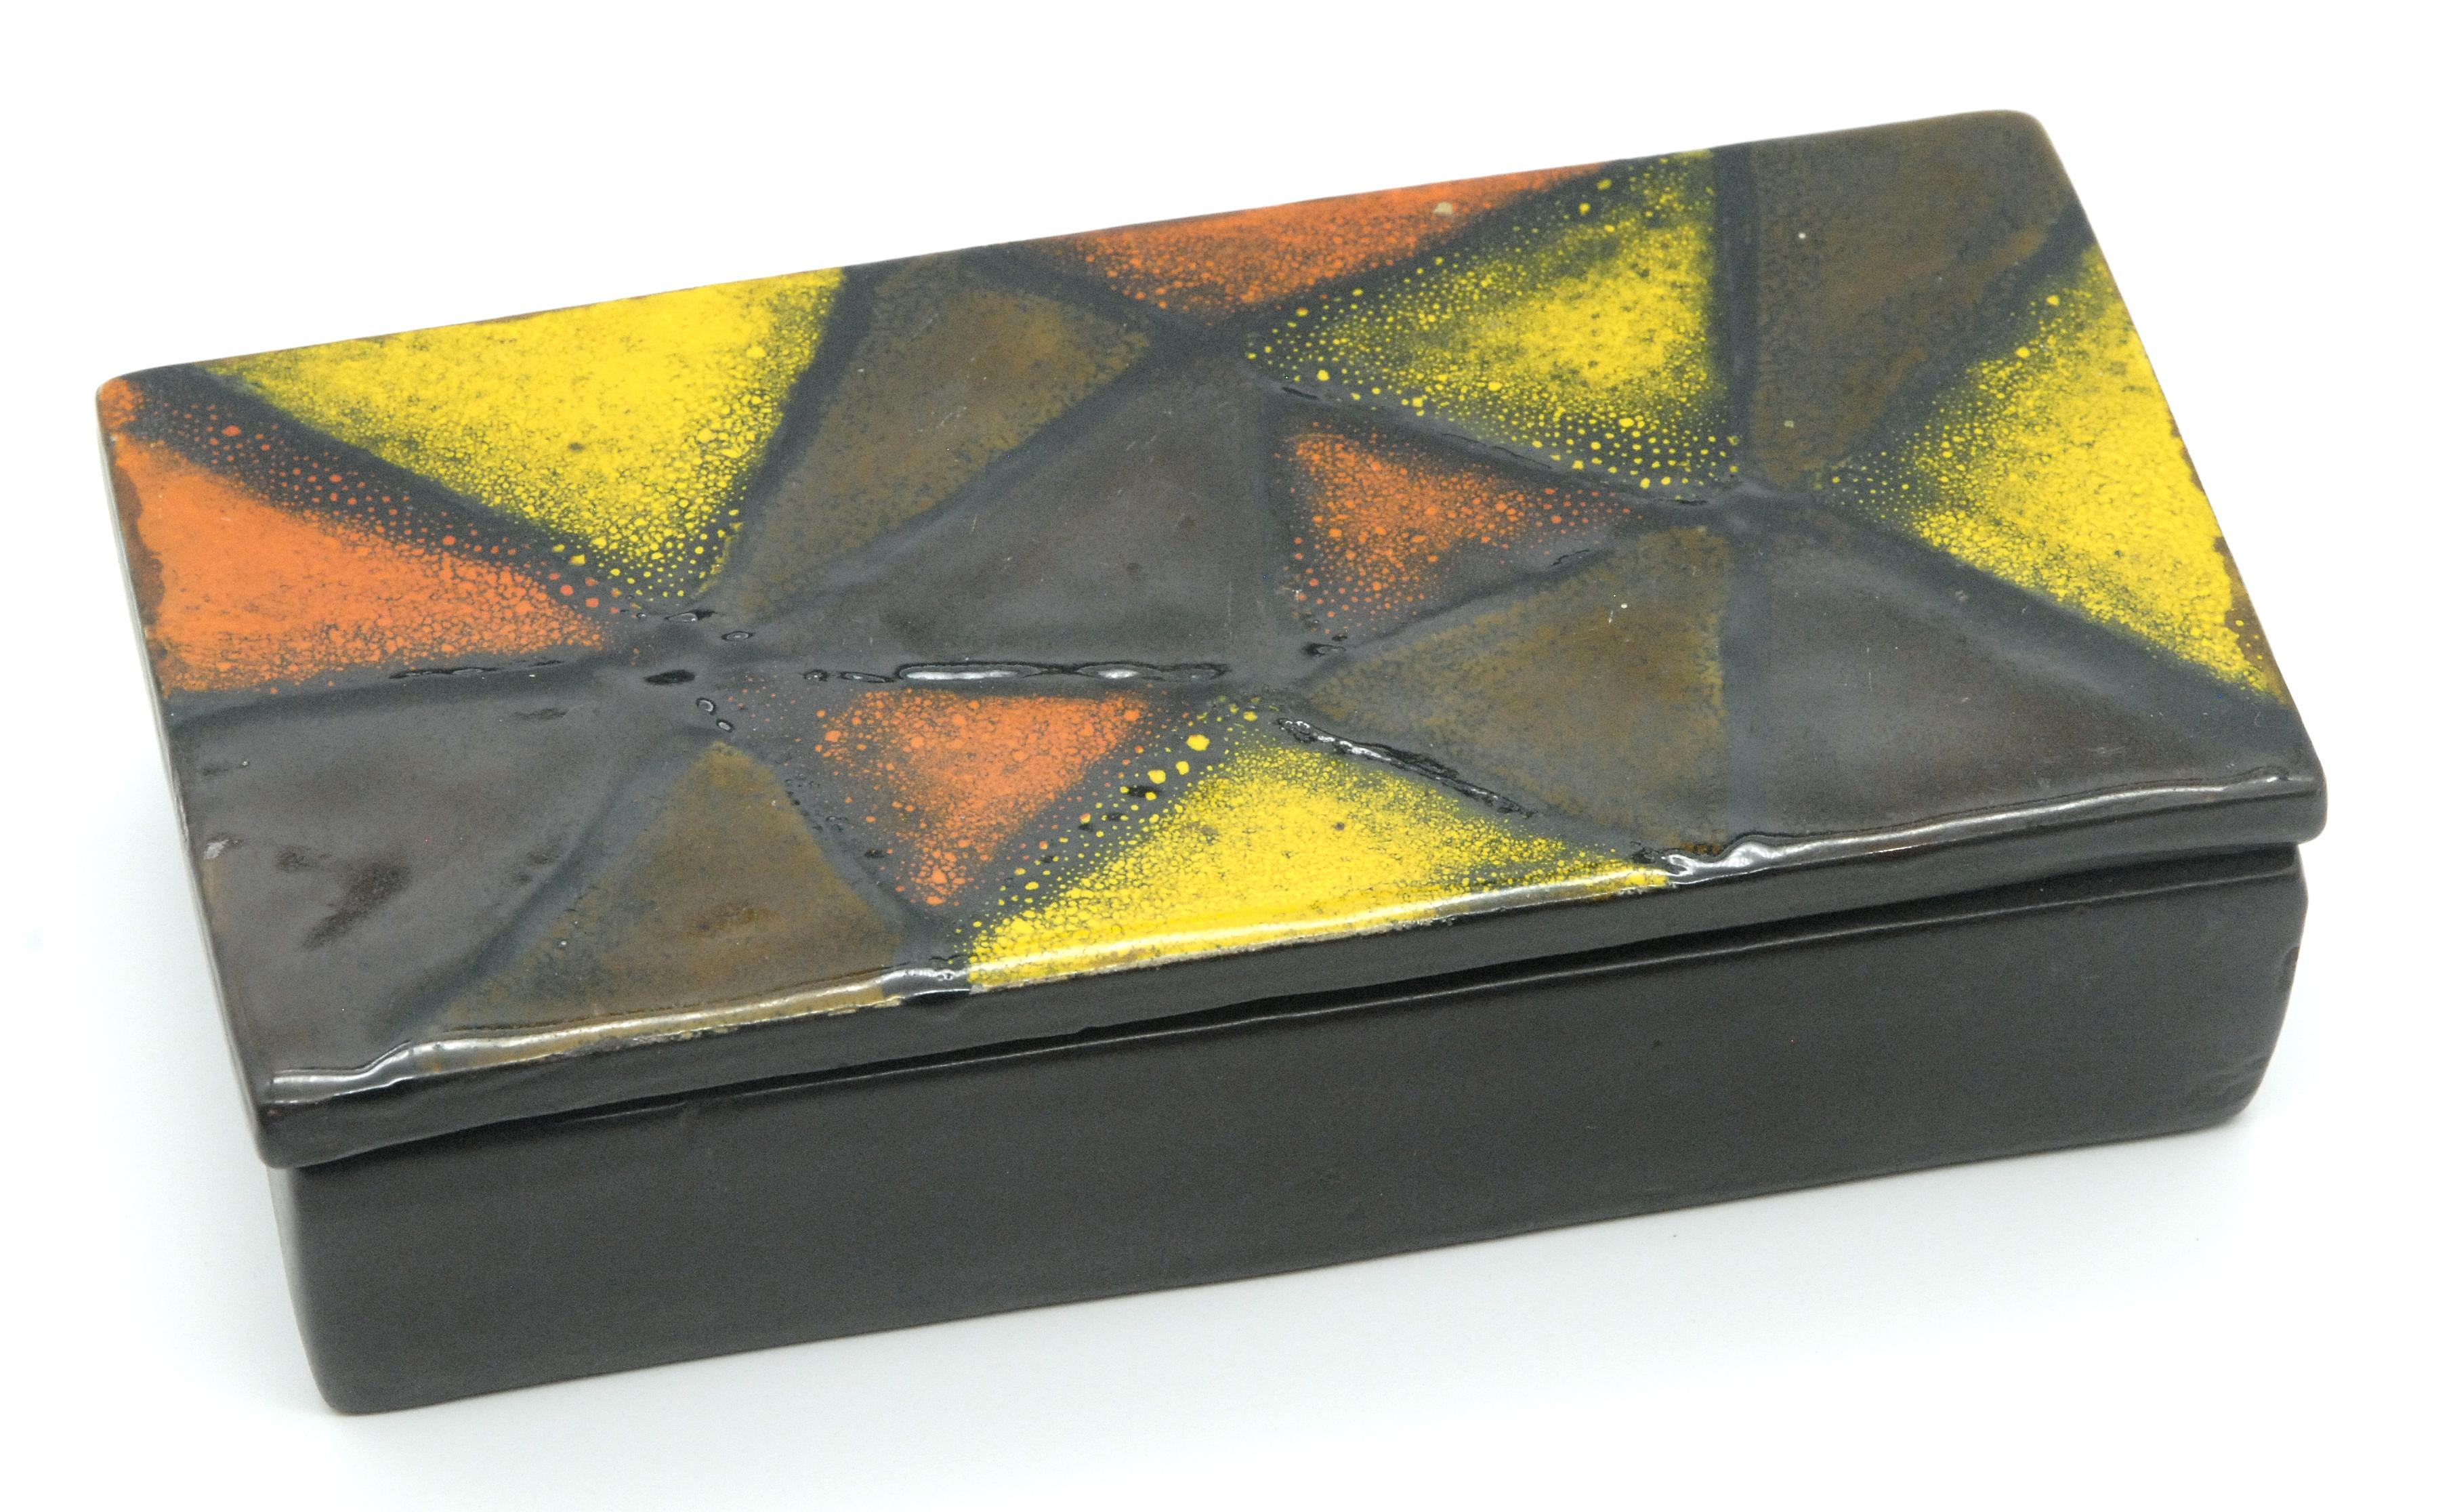 An Aldo Londi designed 'Vetrata' pattern covered box in orange, yellow and brown. Lovely bright condition.